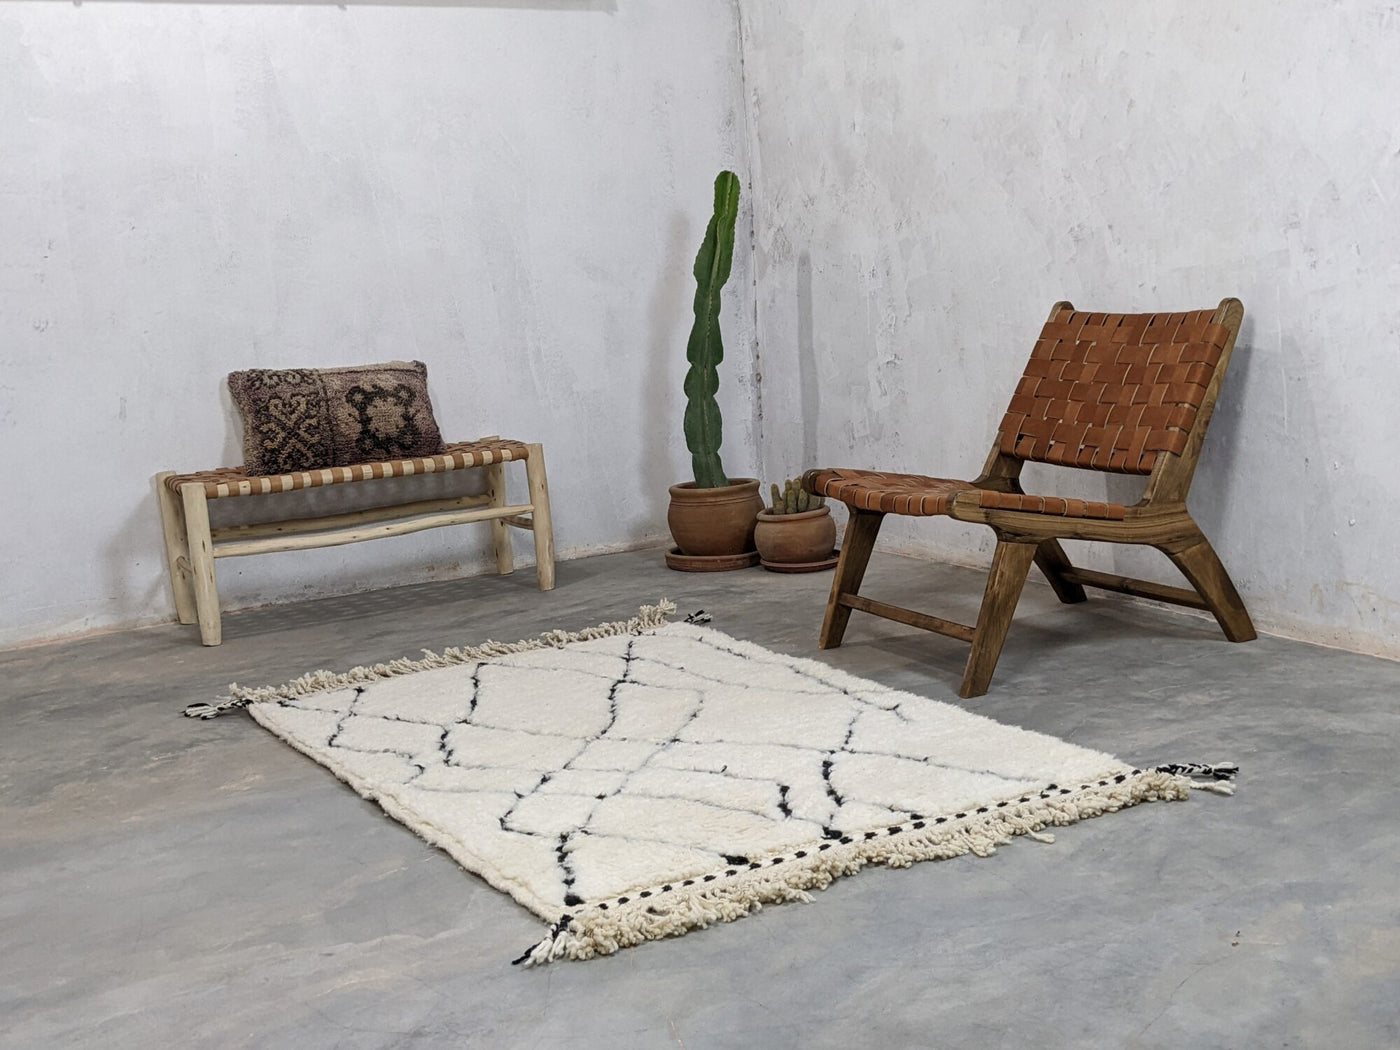 Small Moroccan Rugs - Berber Handwoven Rugs for Home Décor (161 x 110 cm)